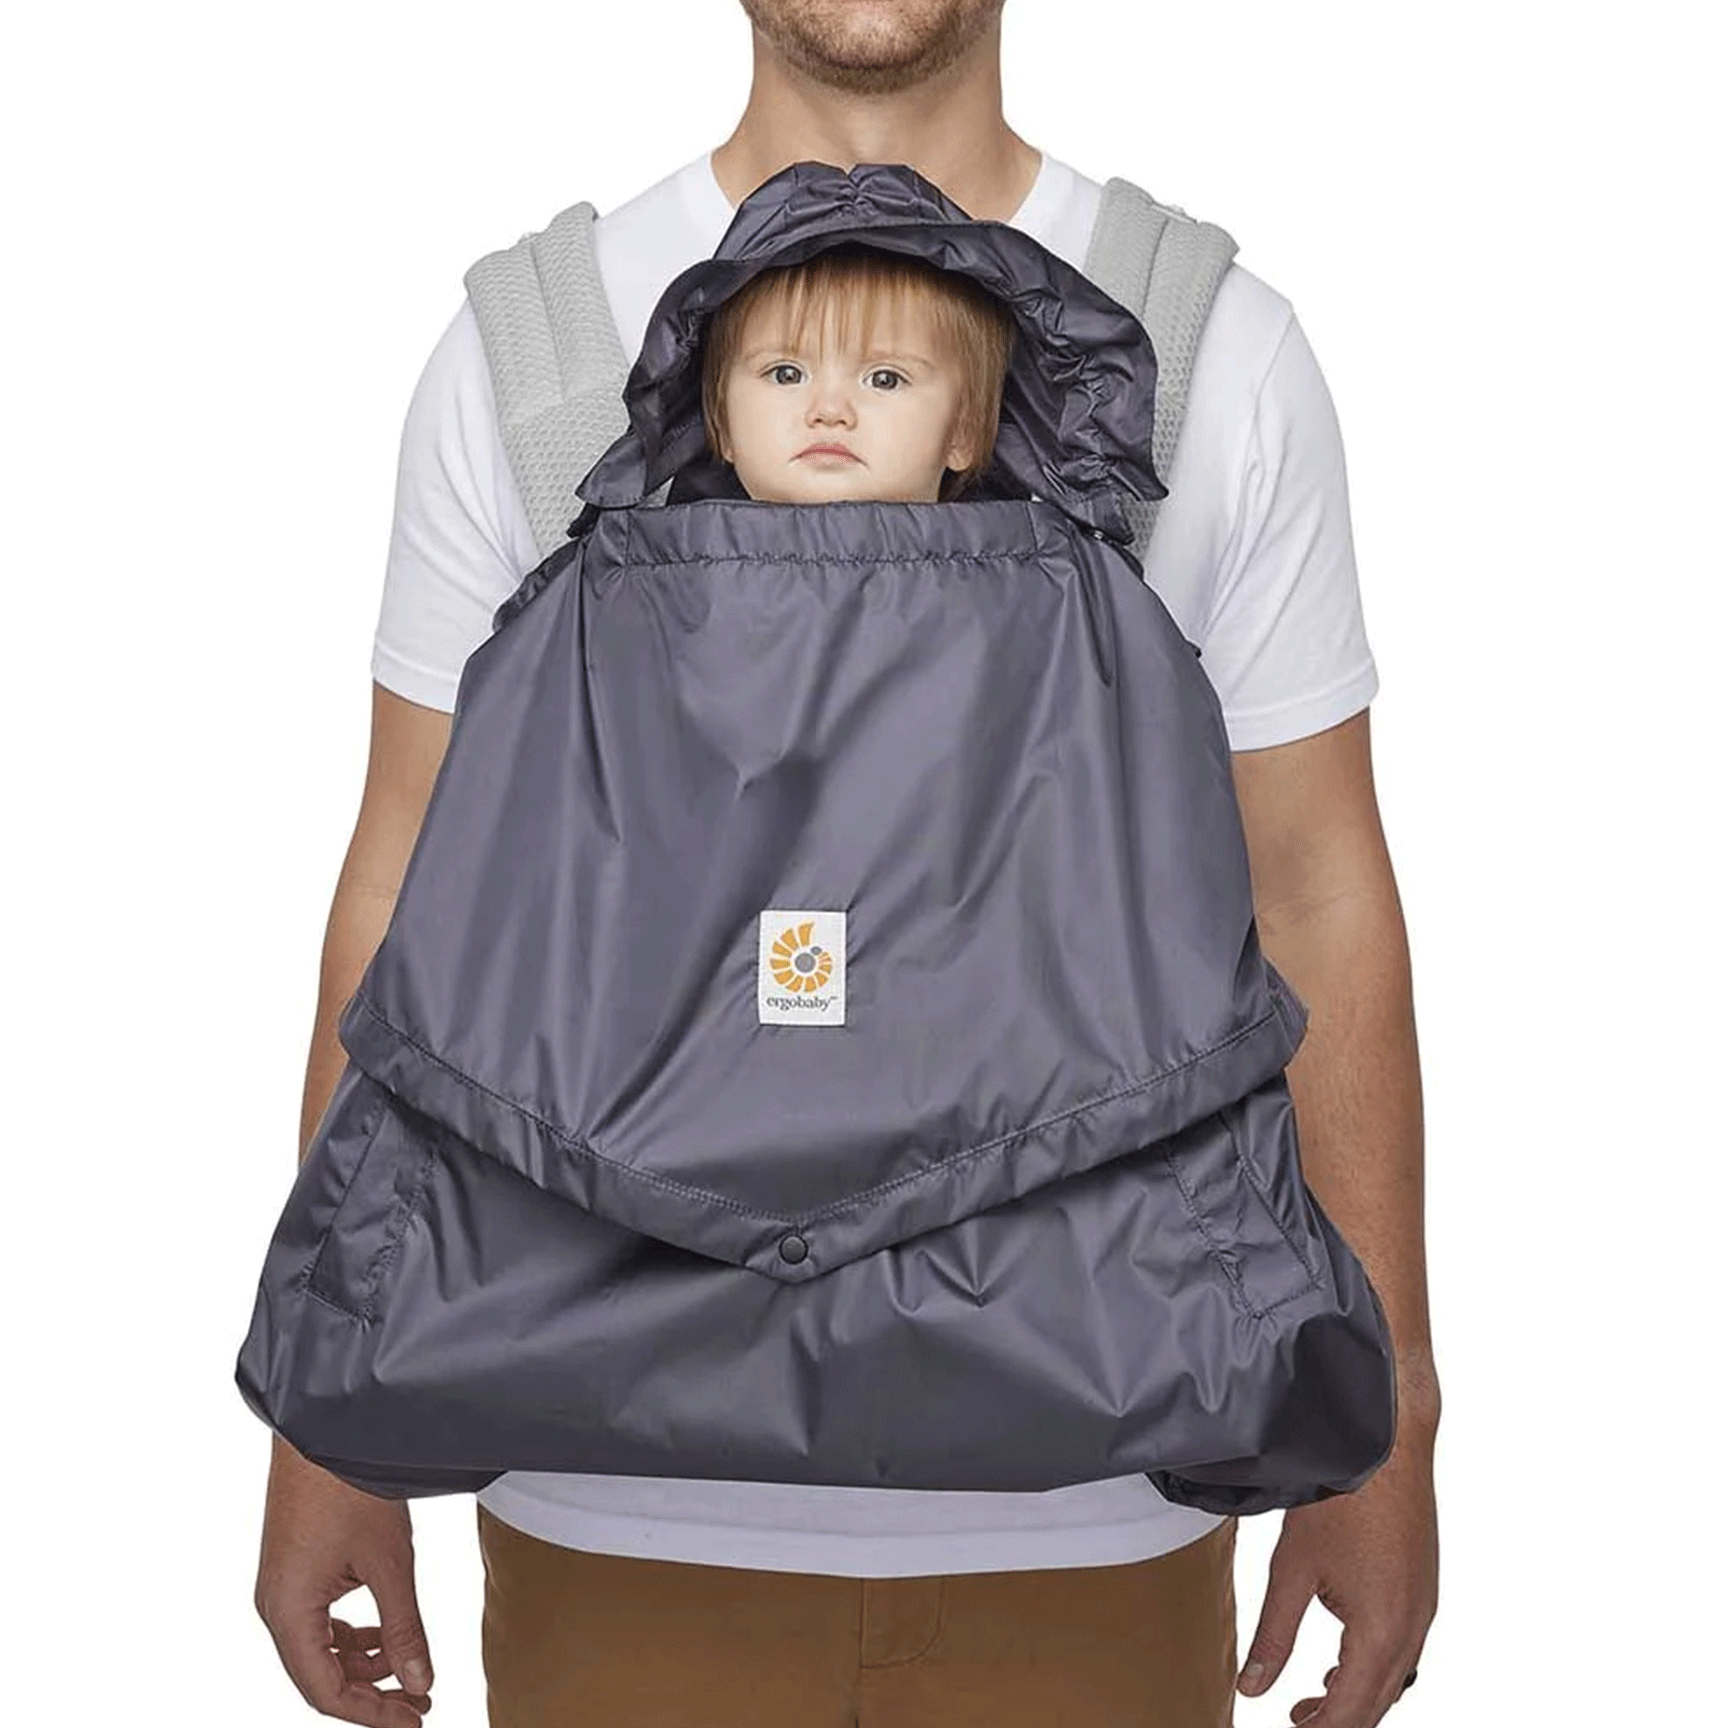 Ergobaby Ergo Carrier Rain and Wind Cover in Charcoal Baby Carriers WCRWCHAR 191653006409